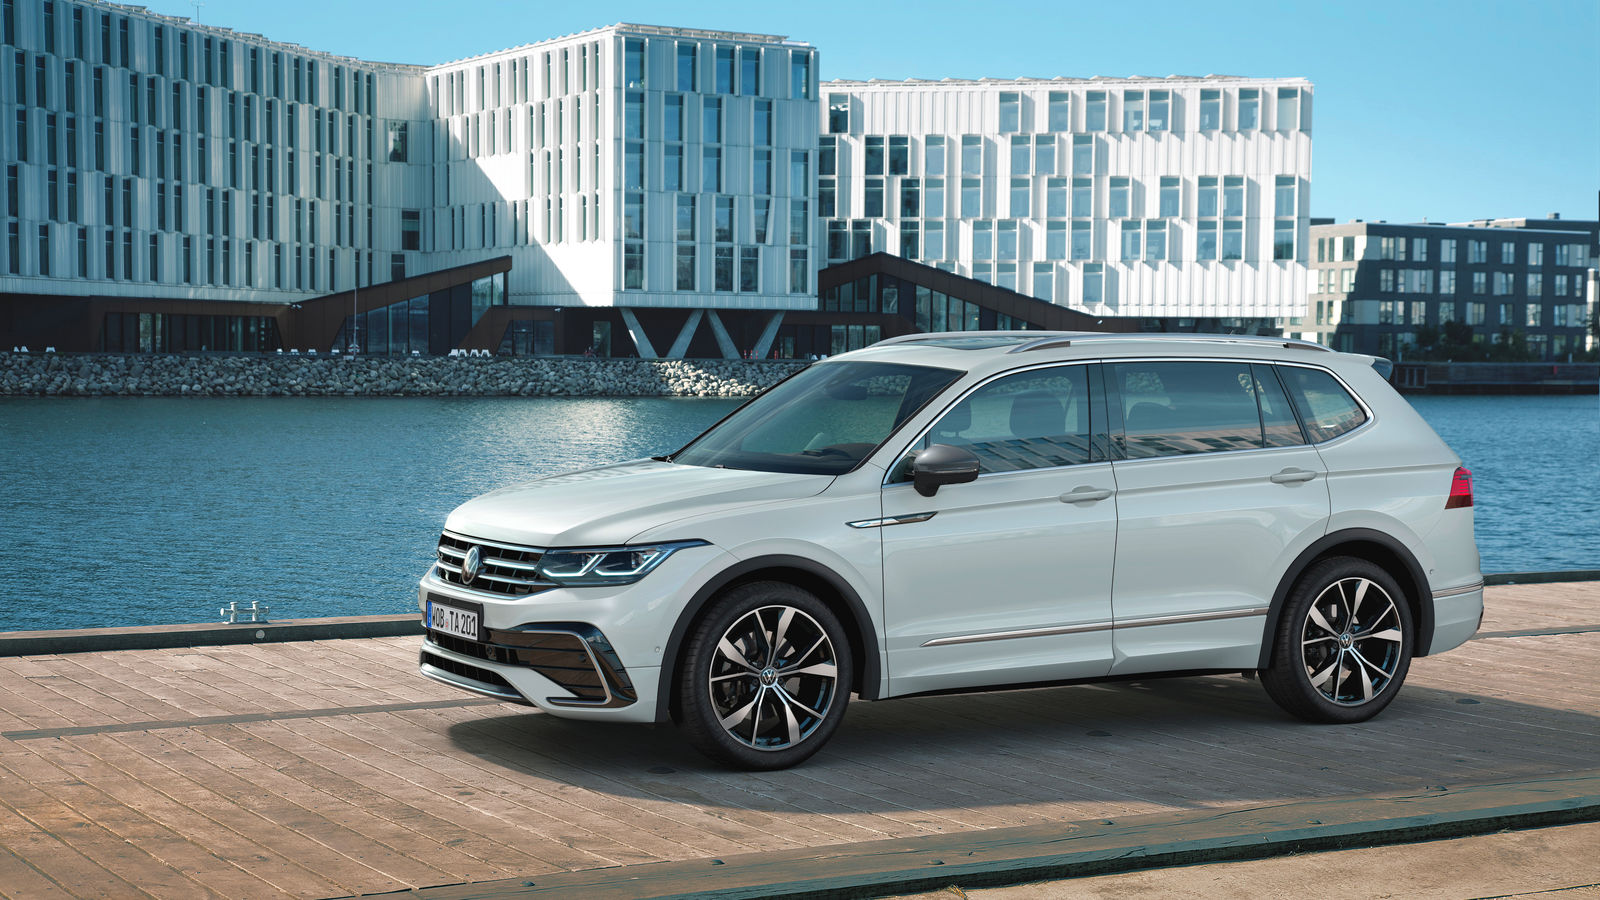 The new Tiguan Allspace: new control and assist systems for the